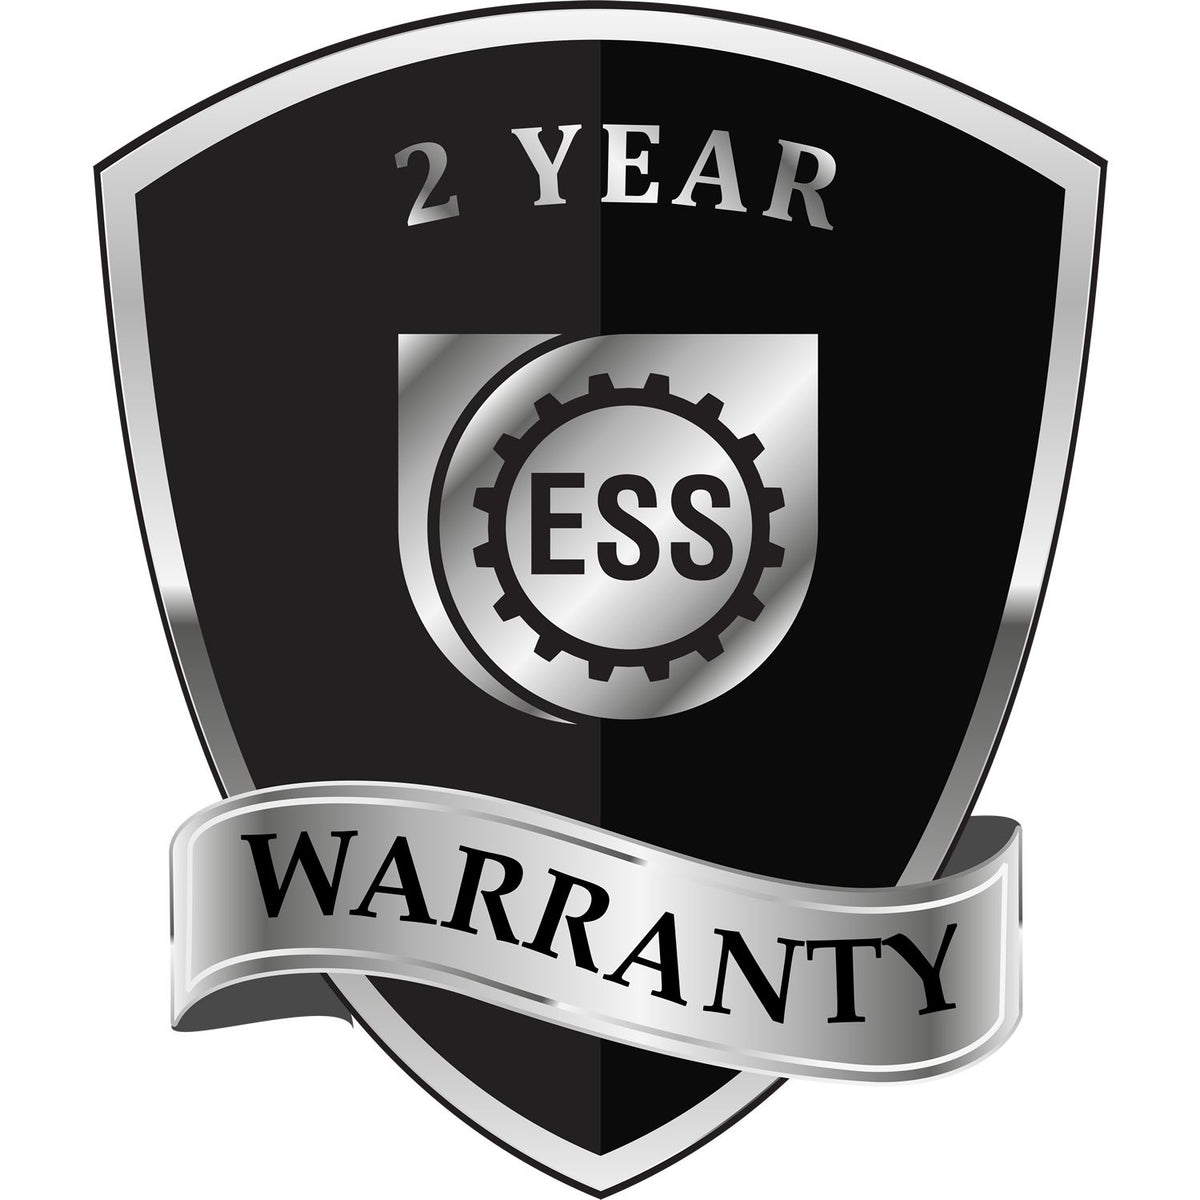 A badge or emblem showing a warranty icon for the Handheld Michigan Land Surveyor Seal